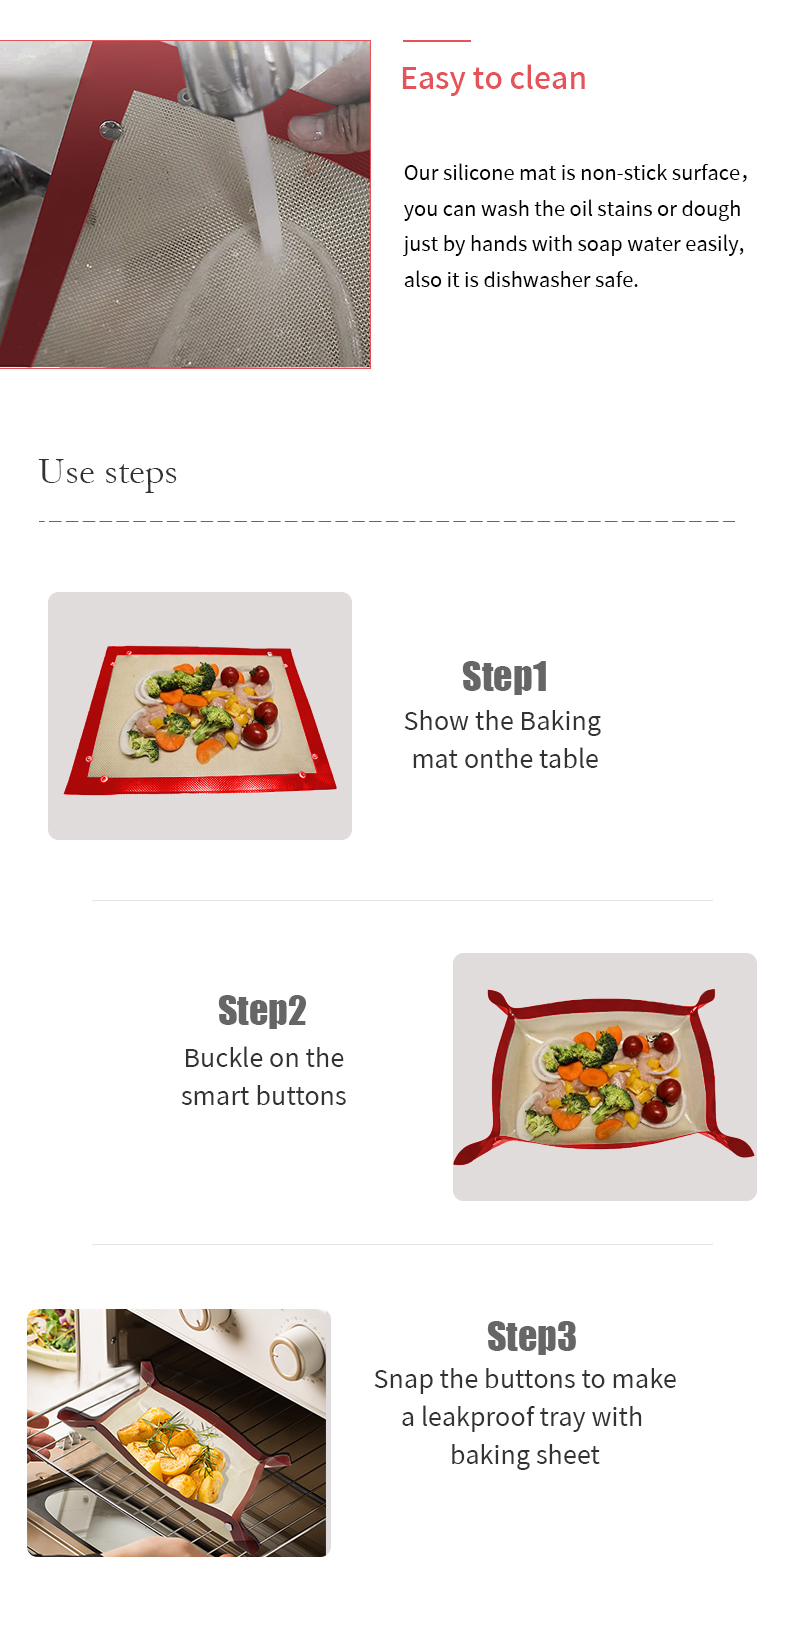 Leakproof Silicone Baking Mat